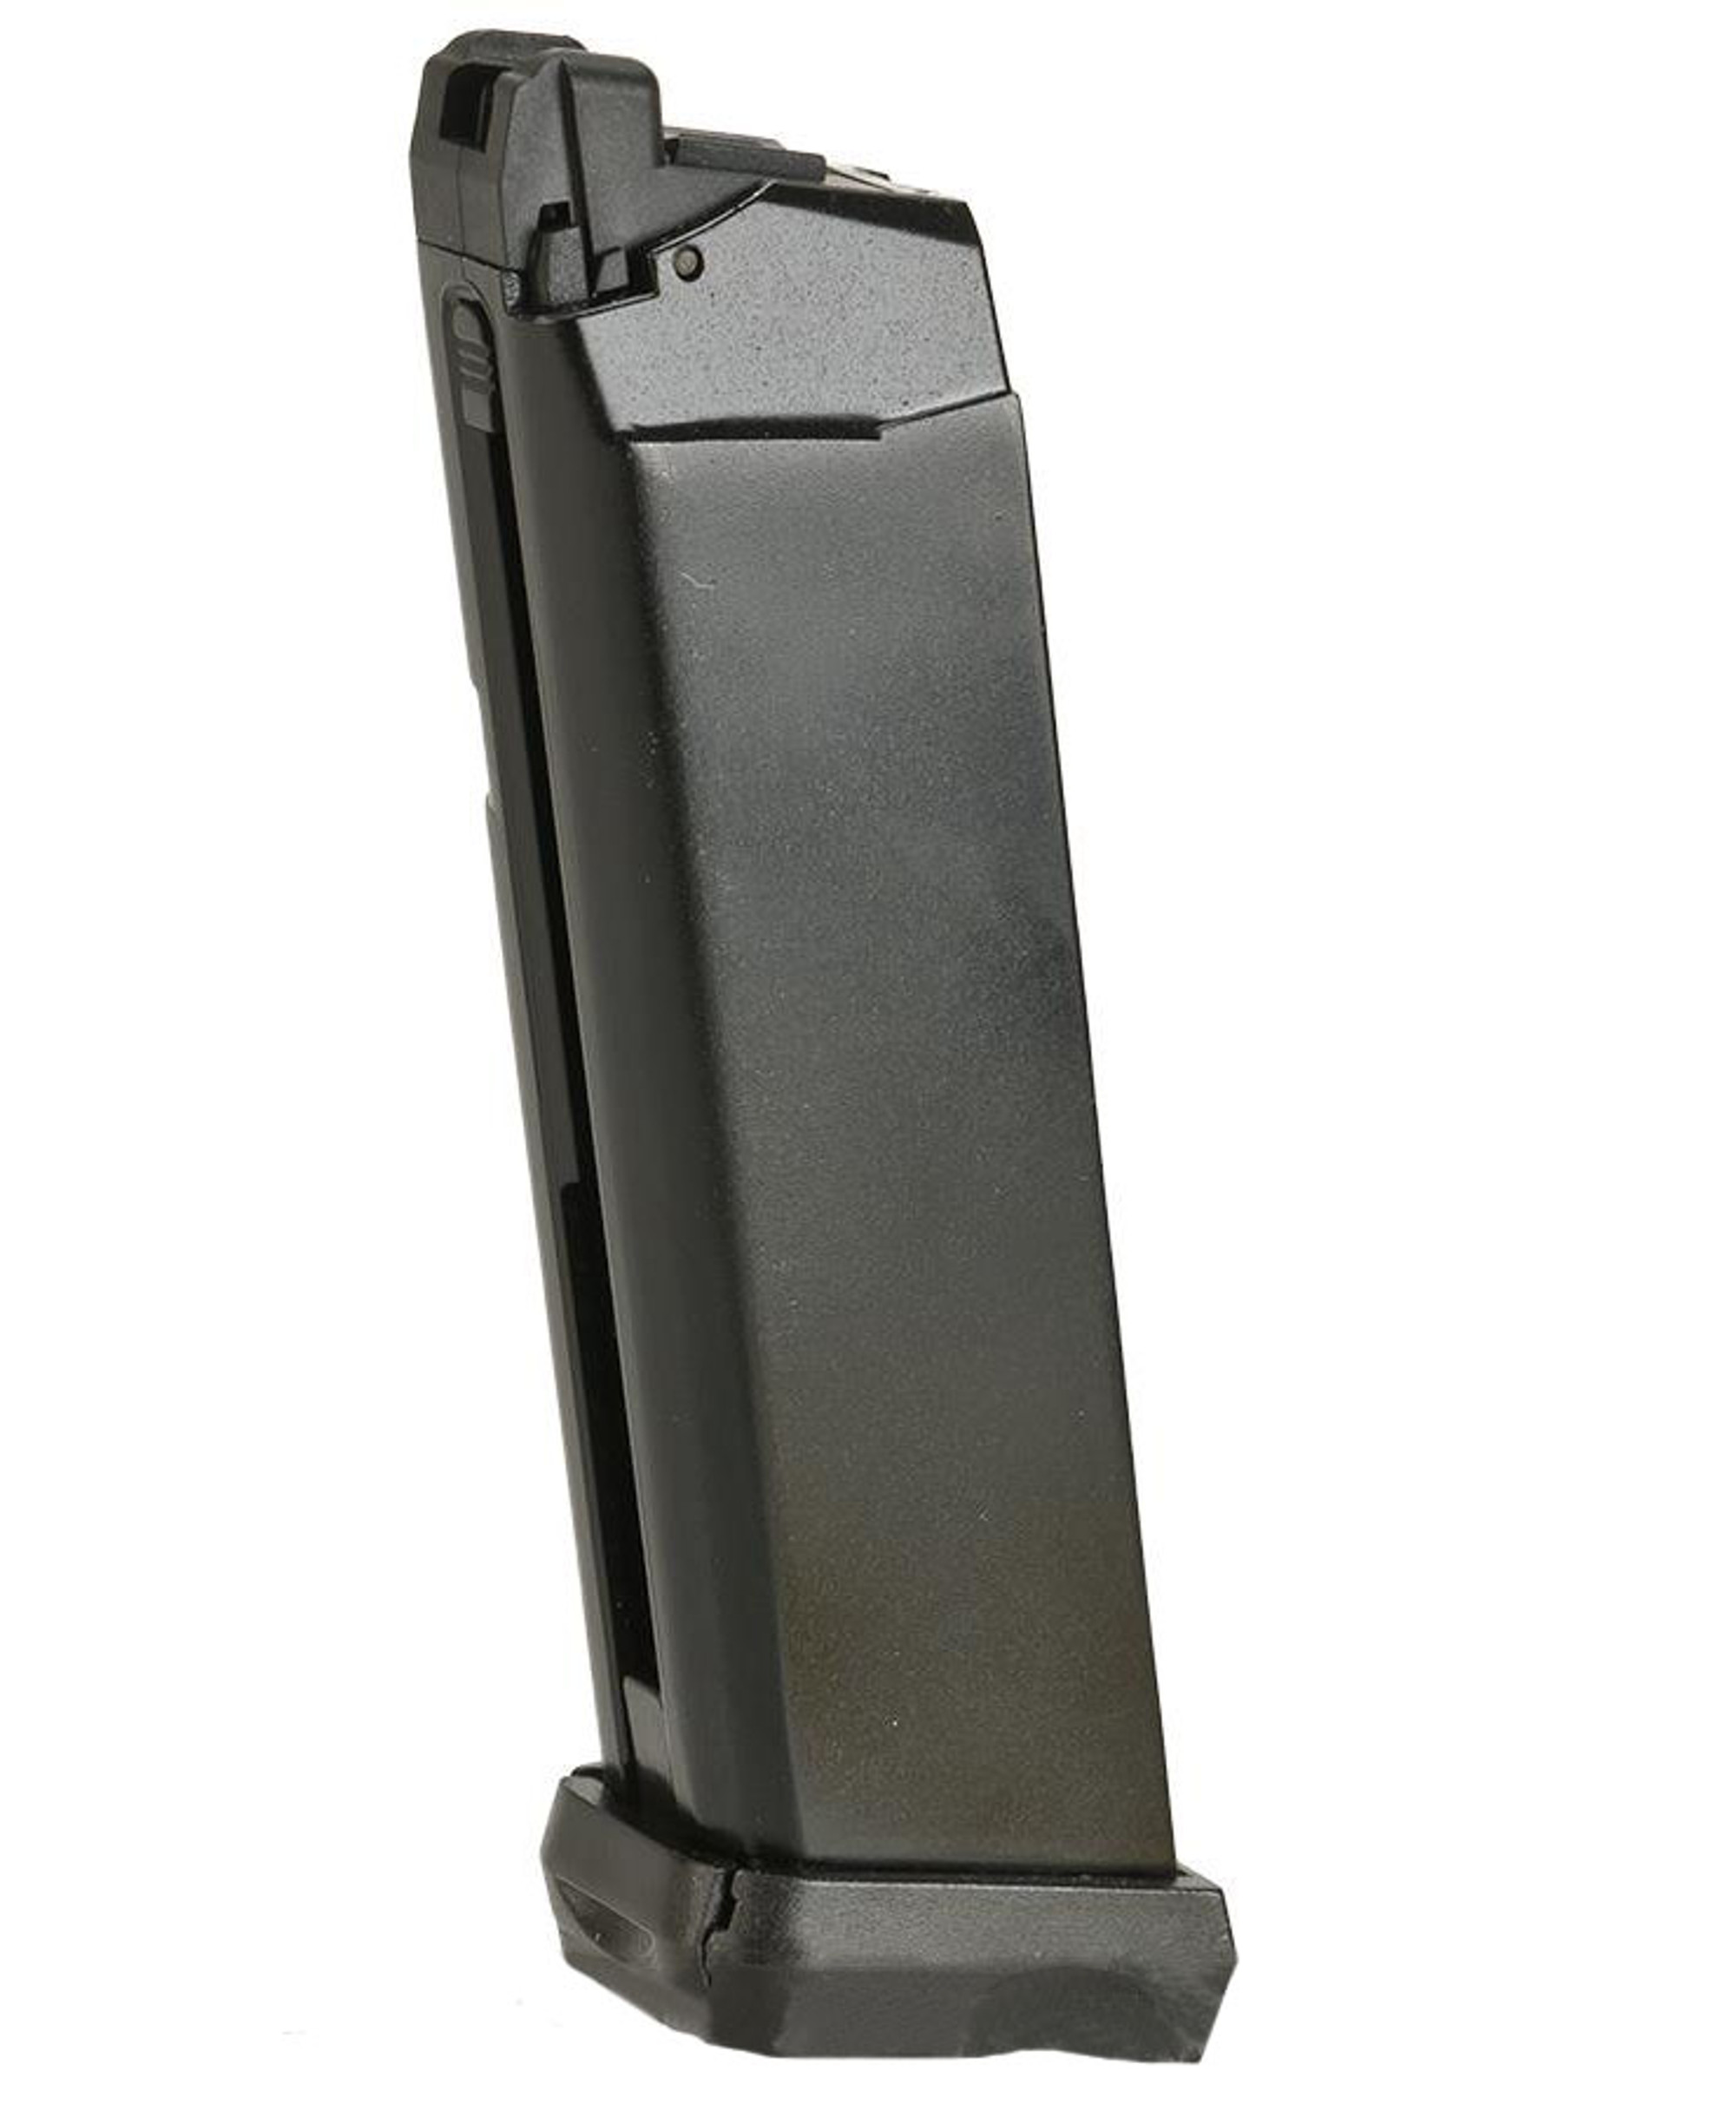 APS 23rd CO2 Magazine for ACP Series Airsoft GBB Pistols (Color: Black Baseplate)